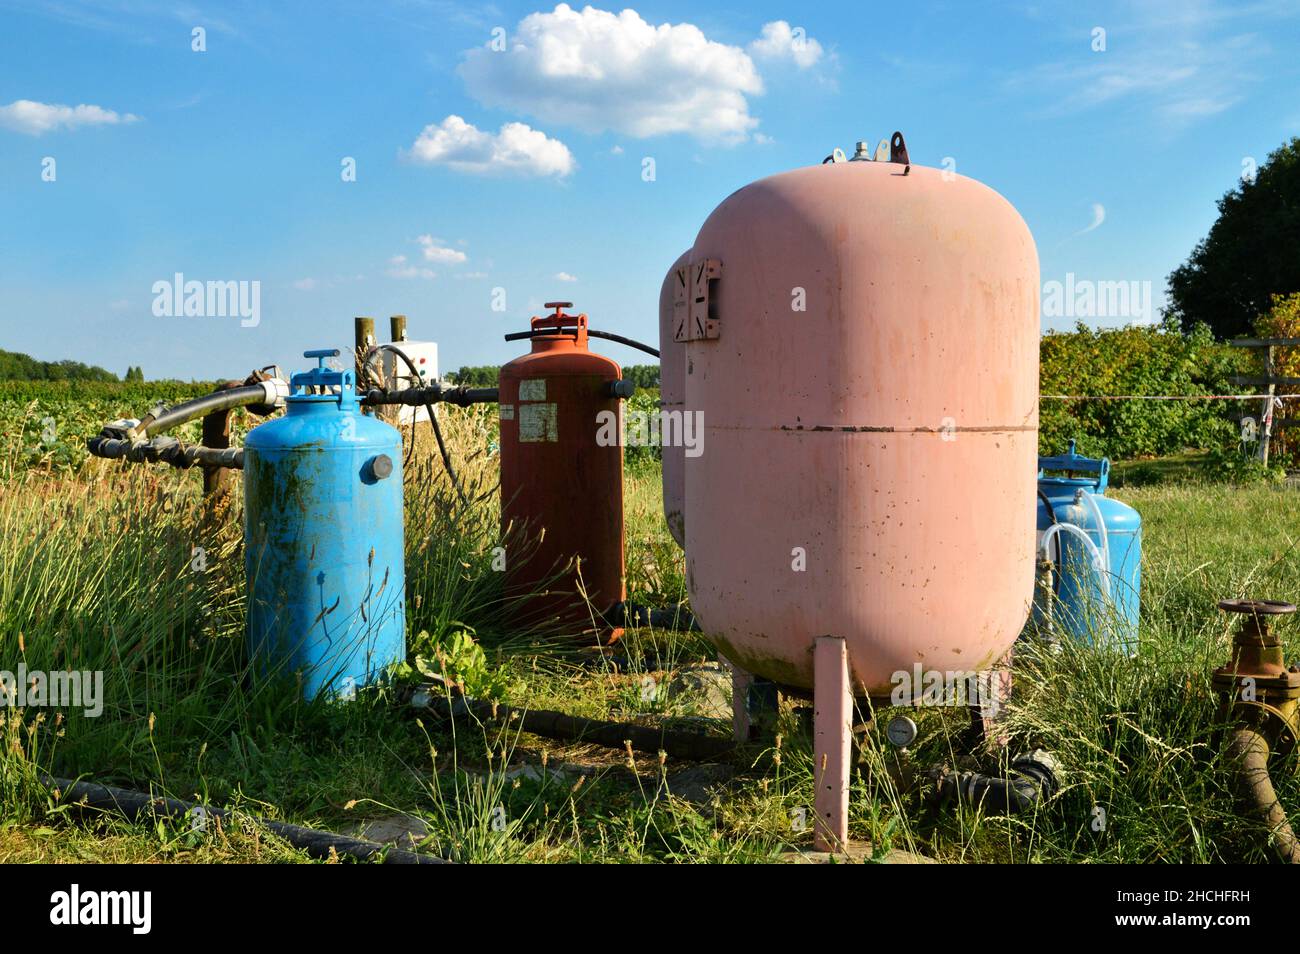 Pumping irrigation for agricultural irrigation system for agricultural cultivation during the summer. Stock Photo